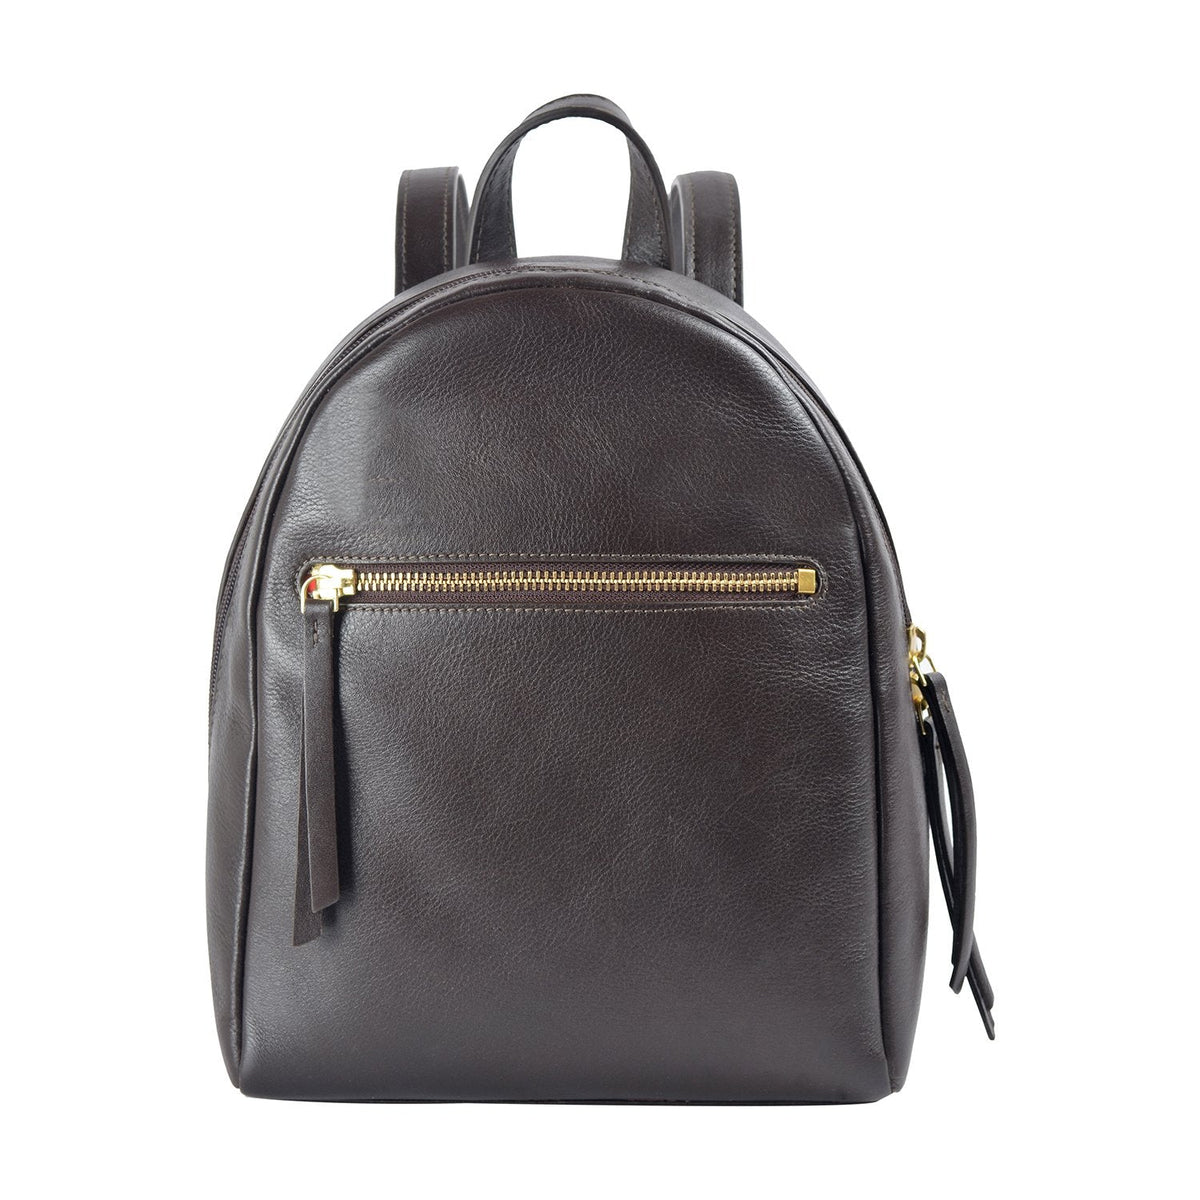 Bags &amp; Luggage - Women&#39;s Bags - Backpacks Kiwi Small Leather Backpack